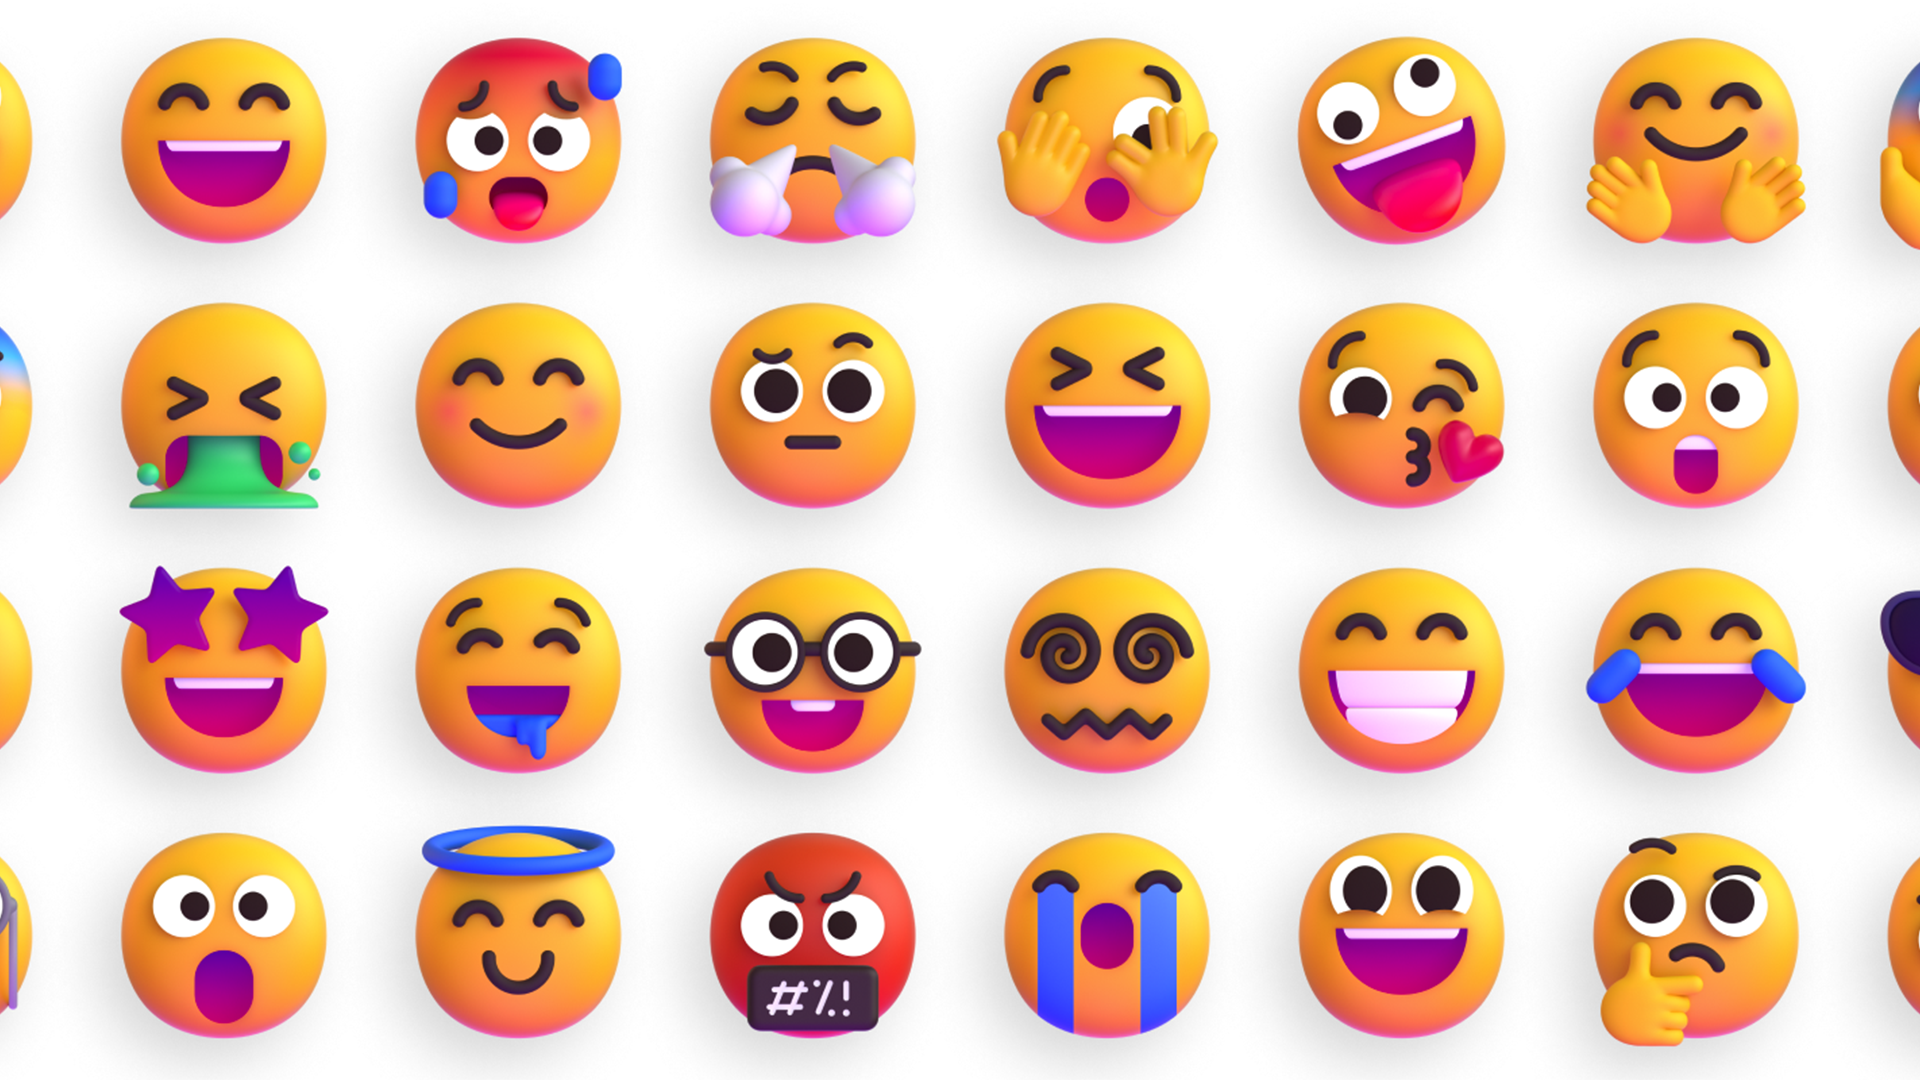 Microsoft’s 3D Emoji Collection Goes Open-Source